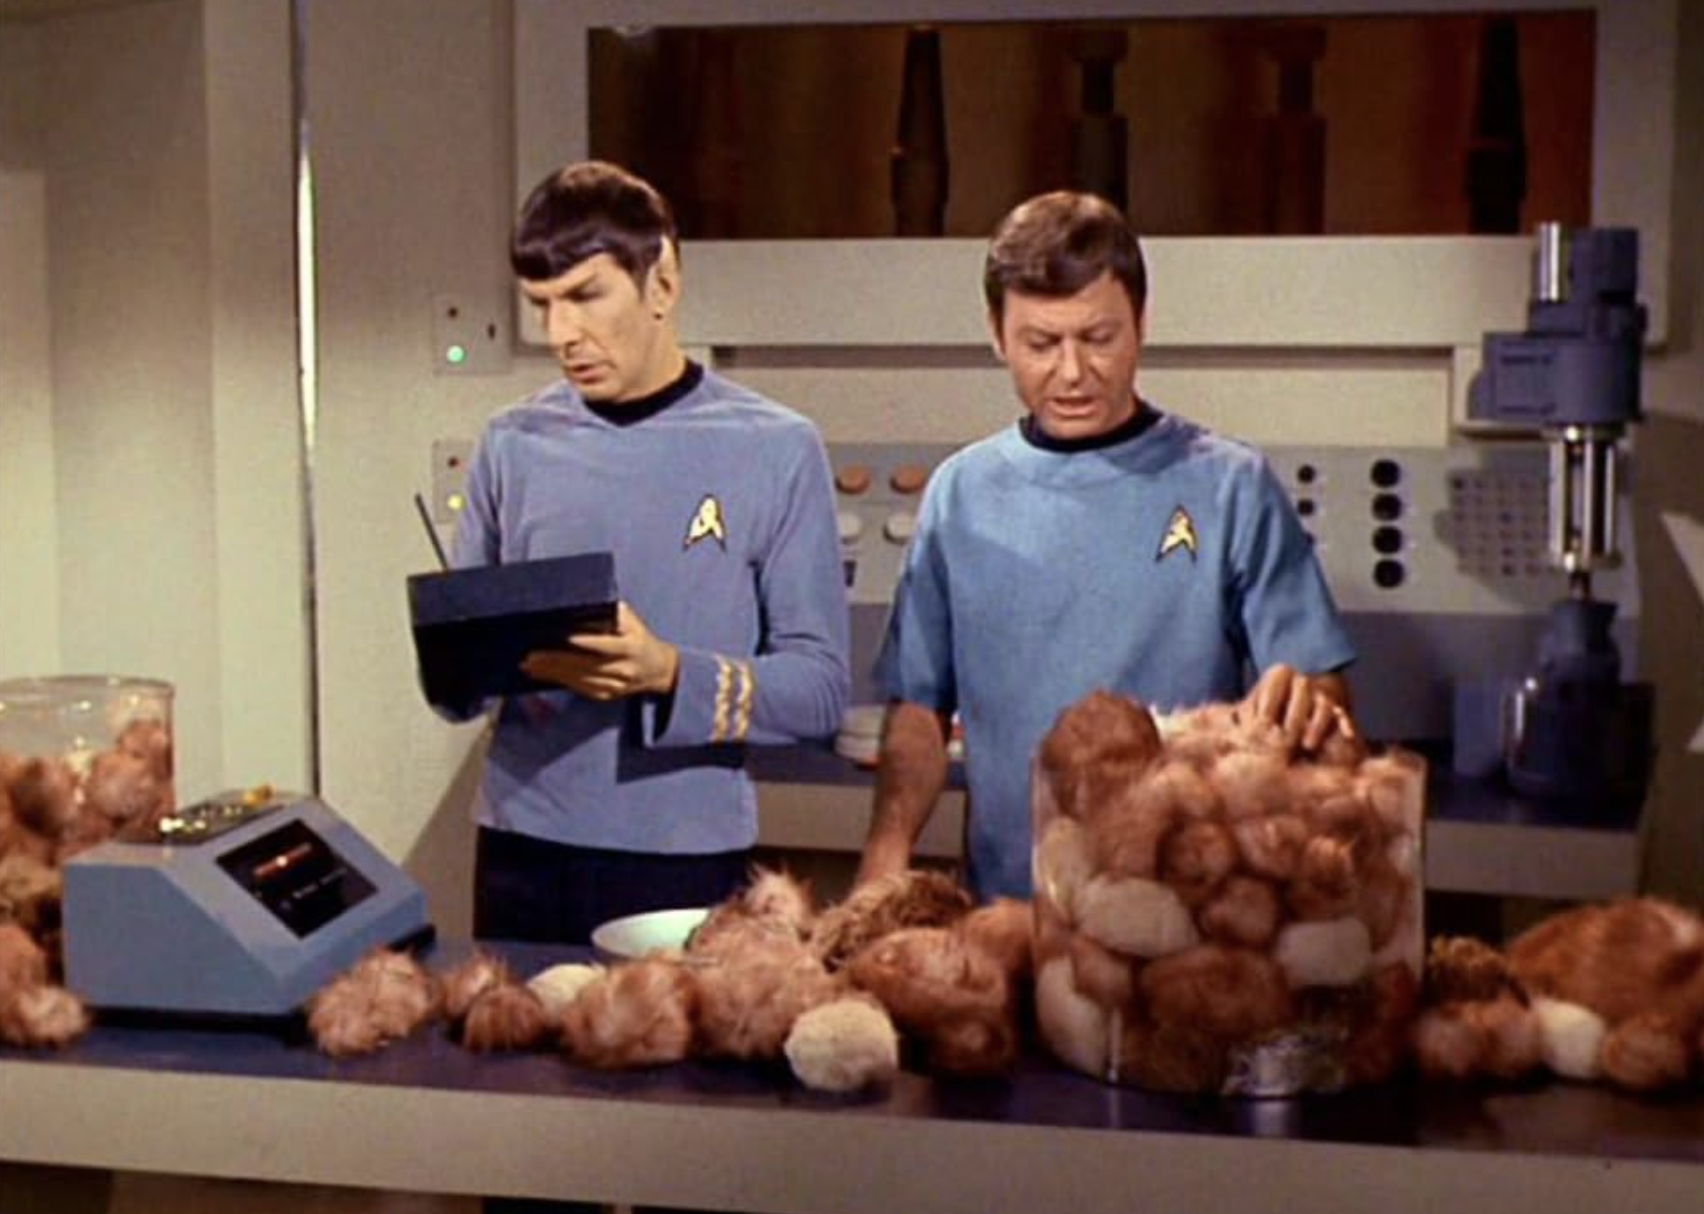 <p>- IMDb user rating: 8.8<br> - Season 2, Episode 15<br> - Director: Joseph Pevney</p>  <p>"Star Trek" isn't just political allegory and technobabble—there has to be levity sometimes as well. Enter the tribbles, cute little fuzzy creatures that create a problem for the Enterprise, as a tribble found in a space station begins multiplying rapidly. Meanwhile, conflict arises between Enterprise crew members and Klingons, culminating in a brawl in the space station. For the 30th anniversary of "Star Trek," an episode of "Deep Space Nine" titled <a href="https://www.startrek.com/news/how-trials-and-tribble-ations-helped-deep-space-nine-find-its-place">"Trials and Tribble-ations" </a>revisited the events of this episode, digitally inserting the "Deep Space Nine" cast into the events of the original episode.</p>